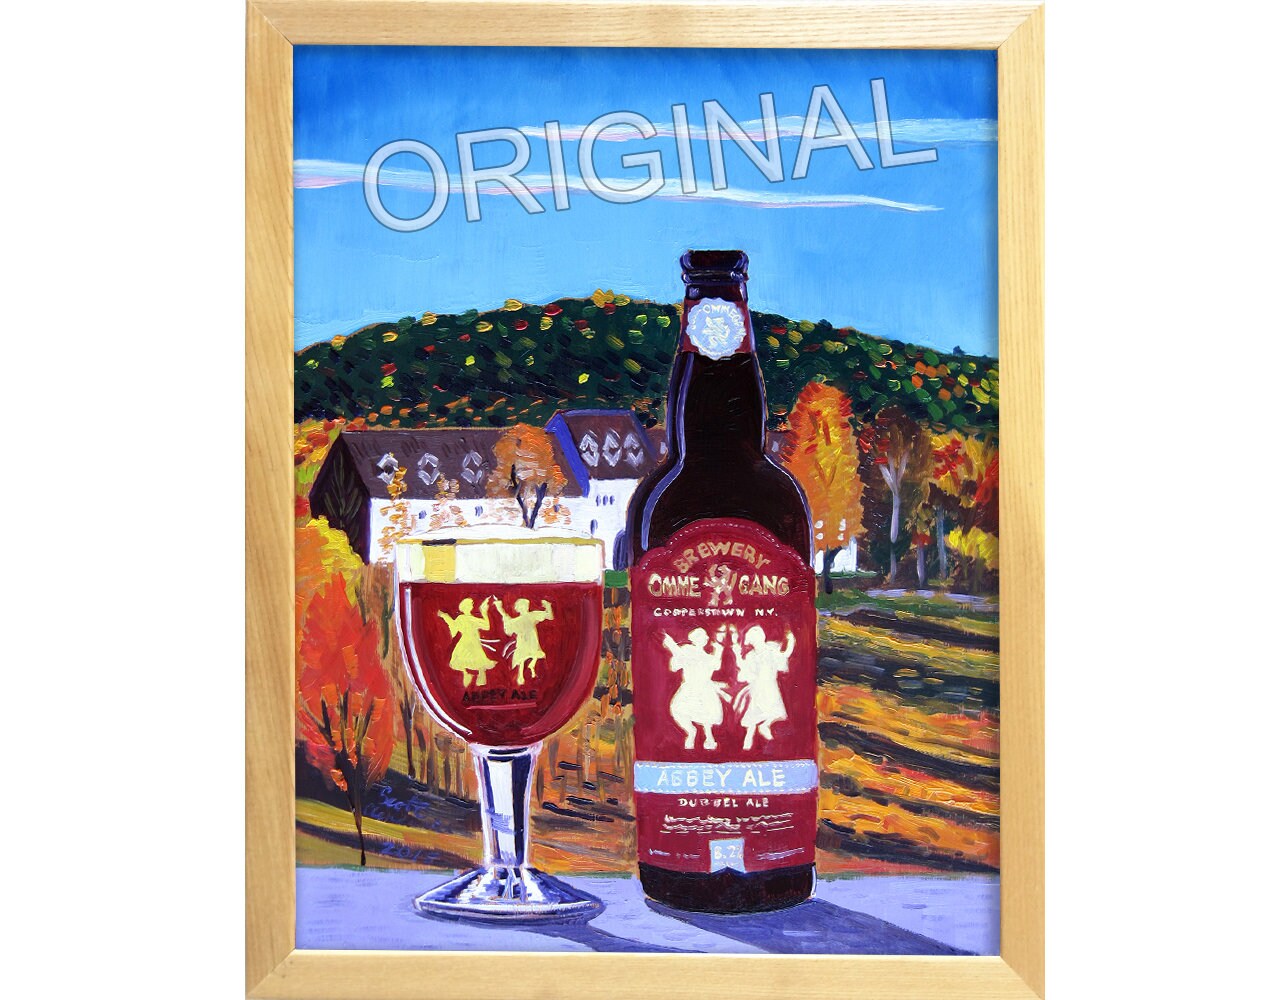 Ommegang Abbey Ale Upcycled Craft Candles